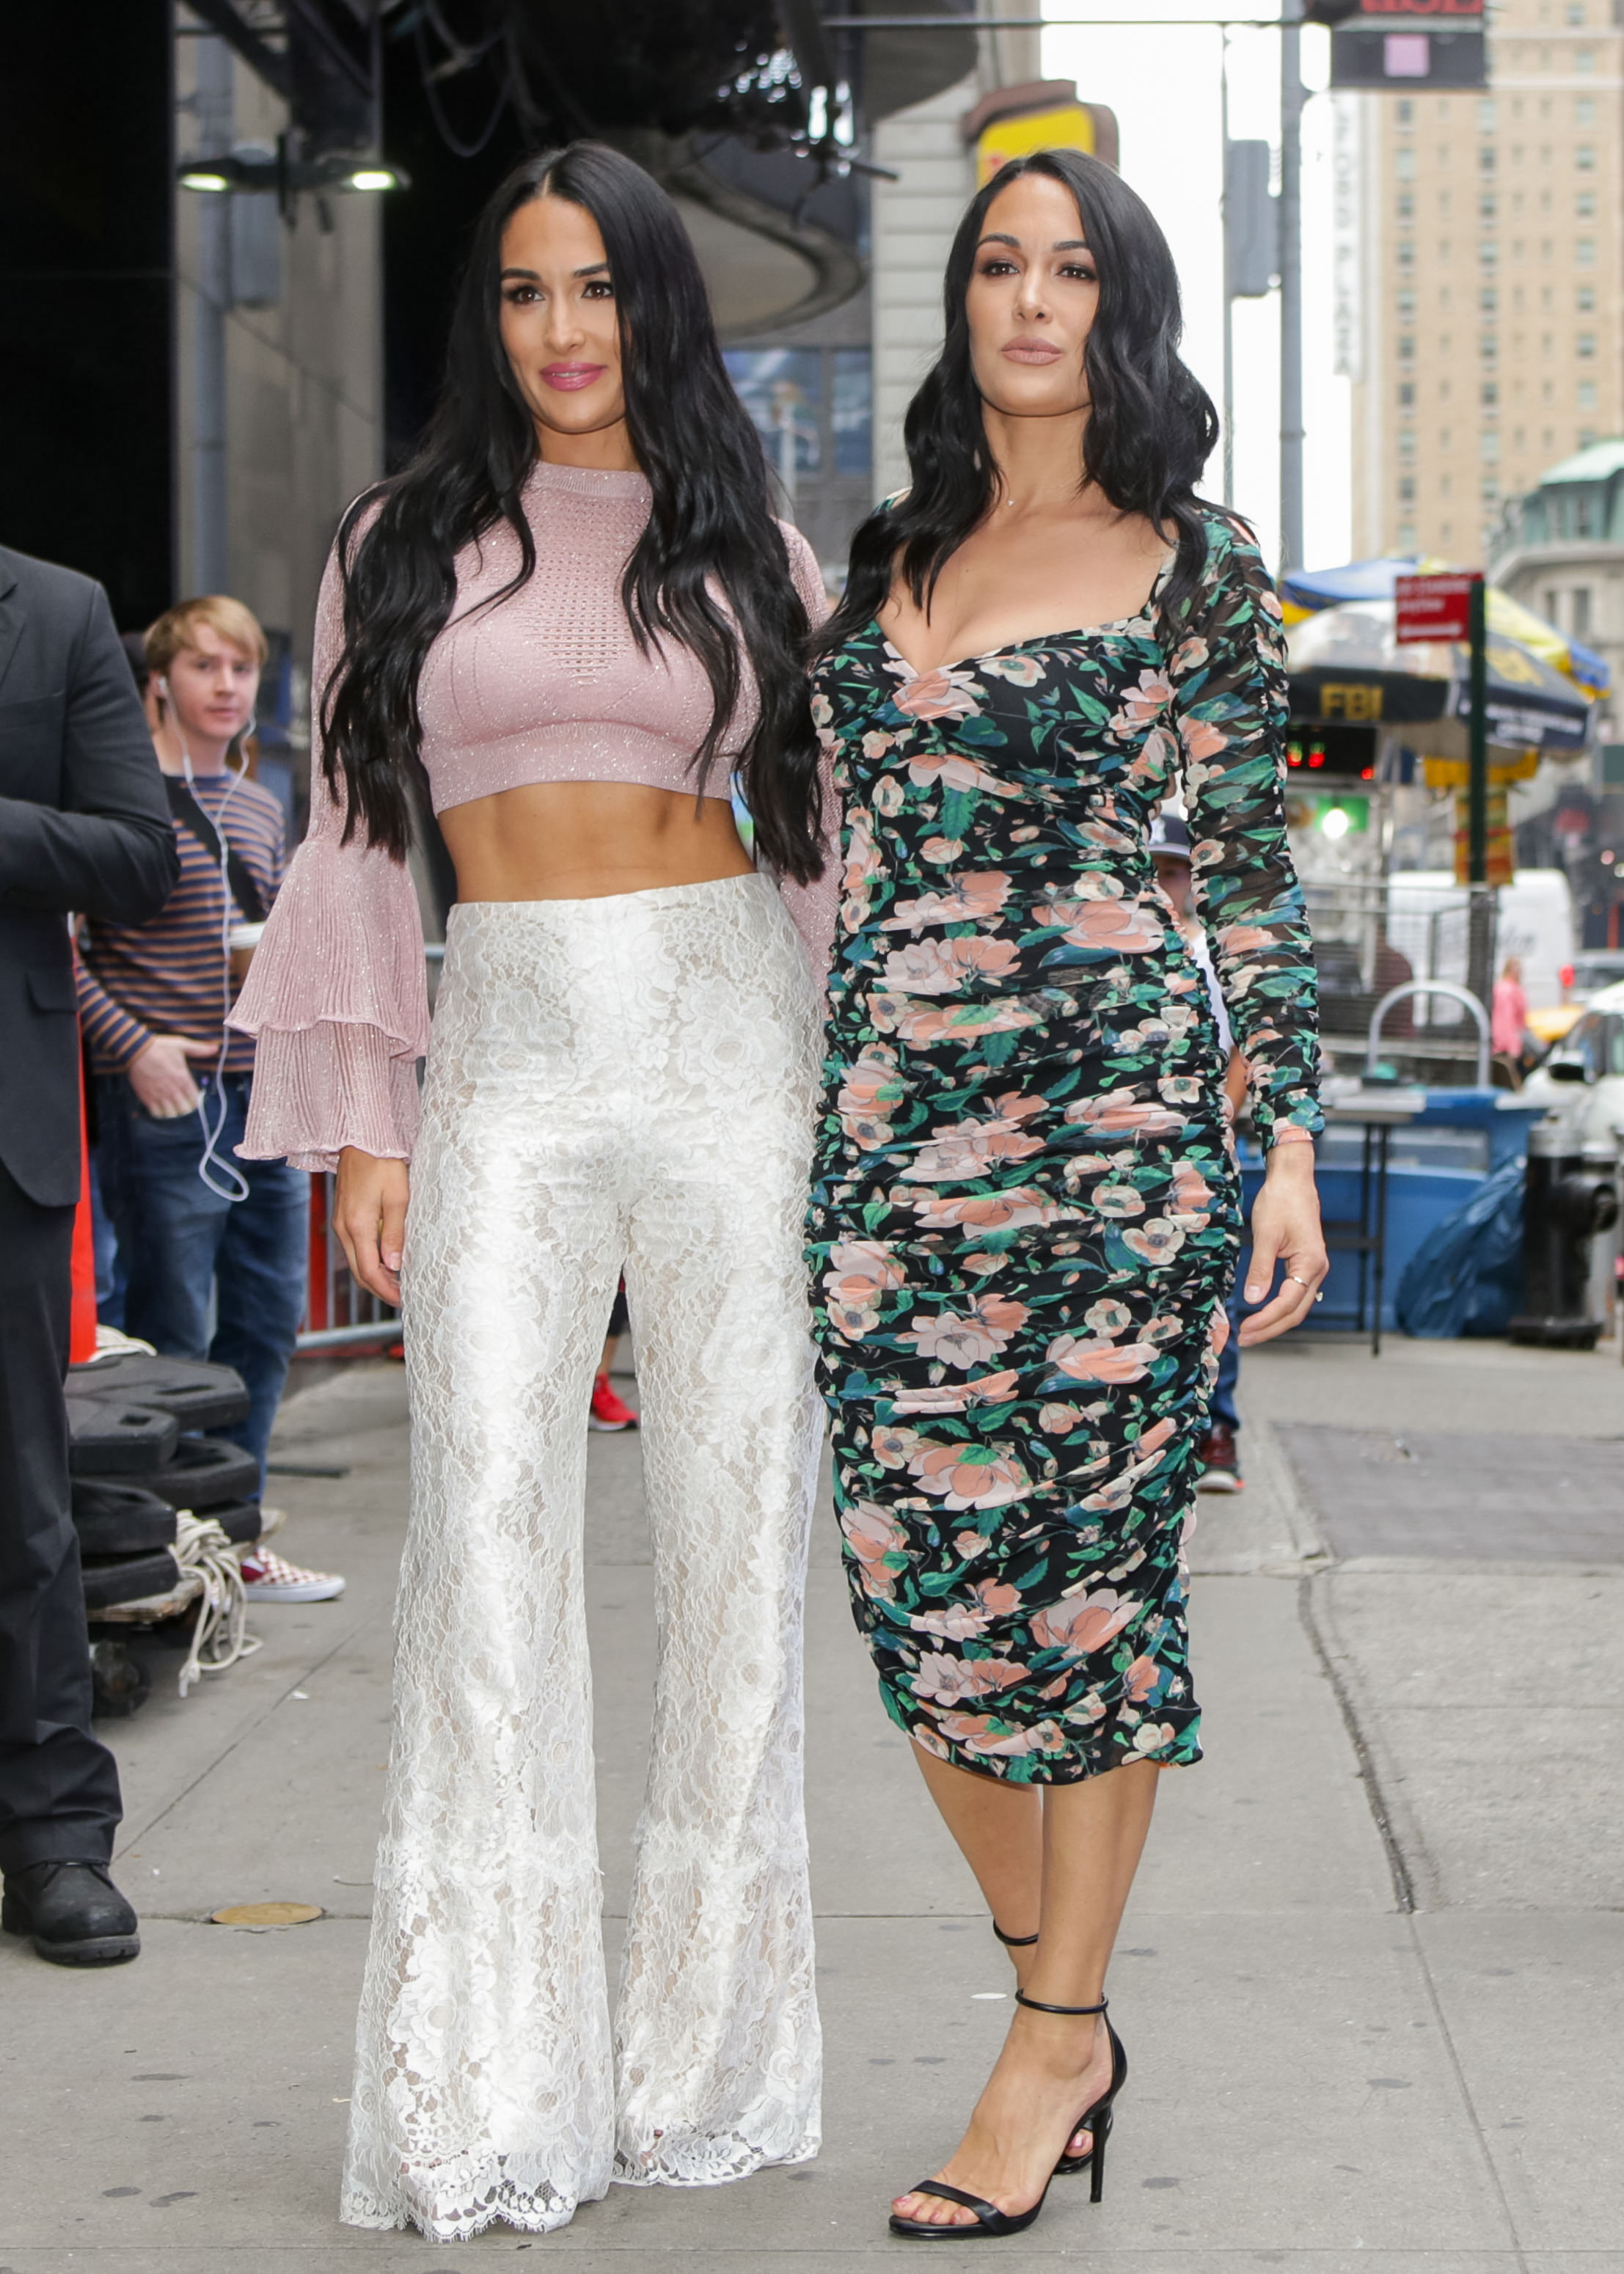 Nikki and Brie Bella step out in all-white ensembles for a lunch outing in  Studio